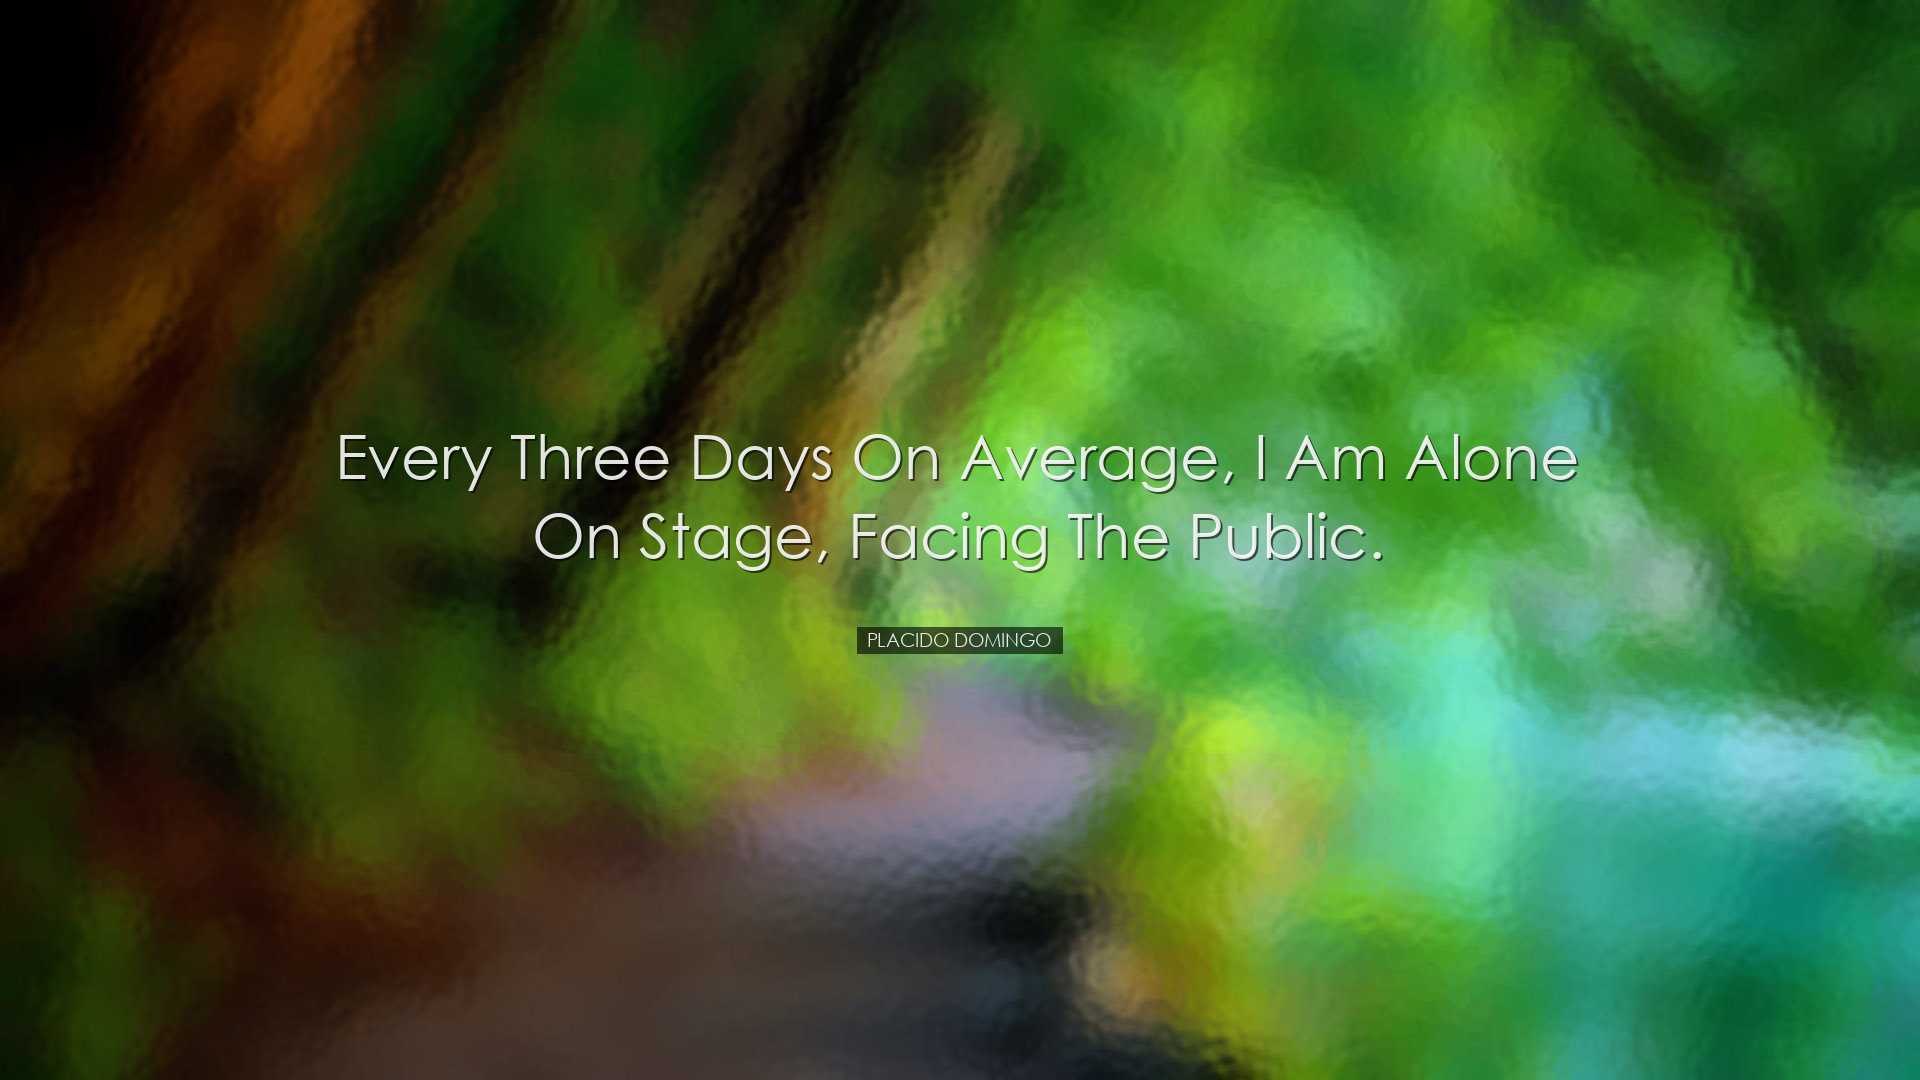 Every three days on average, I am alone on stage, facing the publi